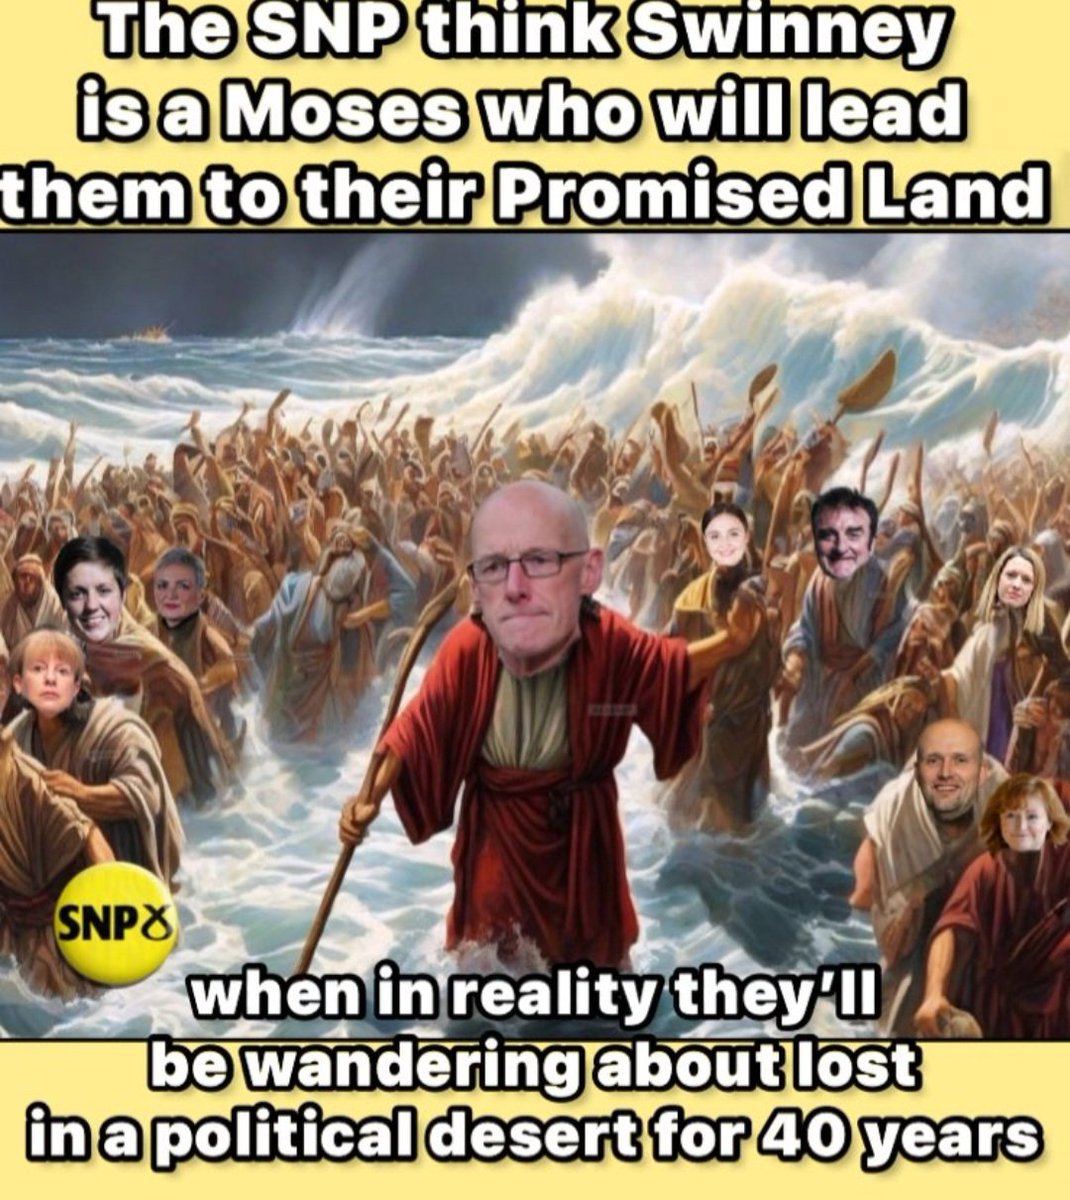 Today is May 16th, 2024 and @JohnSwinney  is still the most Braindead Sock puppet politician in modern Scottish History.@vation_o @Effiedeans @Arnssunshine @SilvioTattiscon  @putey_pute #snpout @vation_o @HumzaYousaf @Alliance4Unity @enough_is_enuf @GitGrumpygit @Iainmackay8